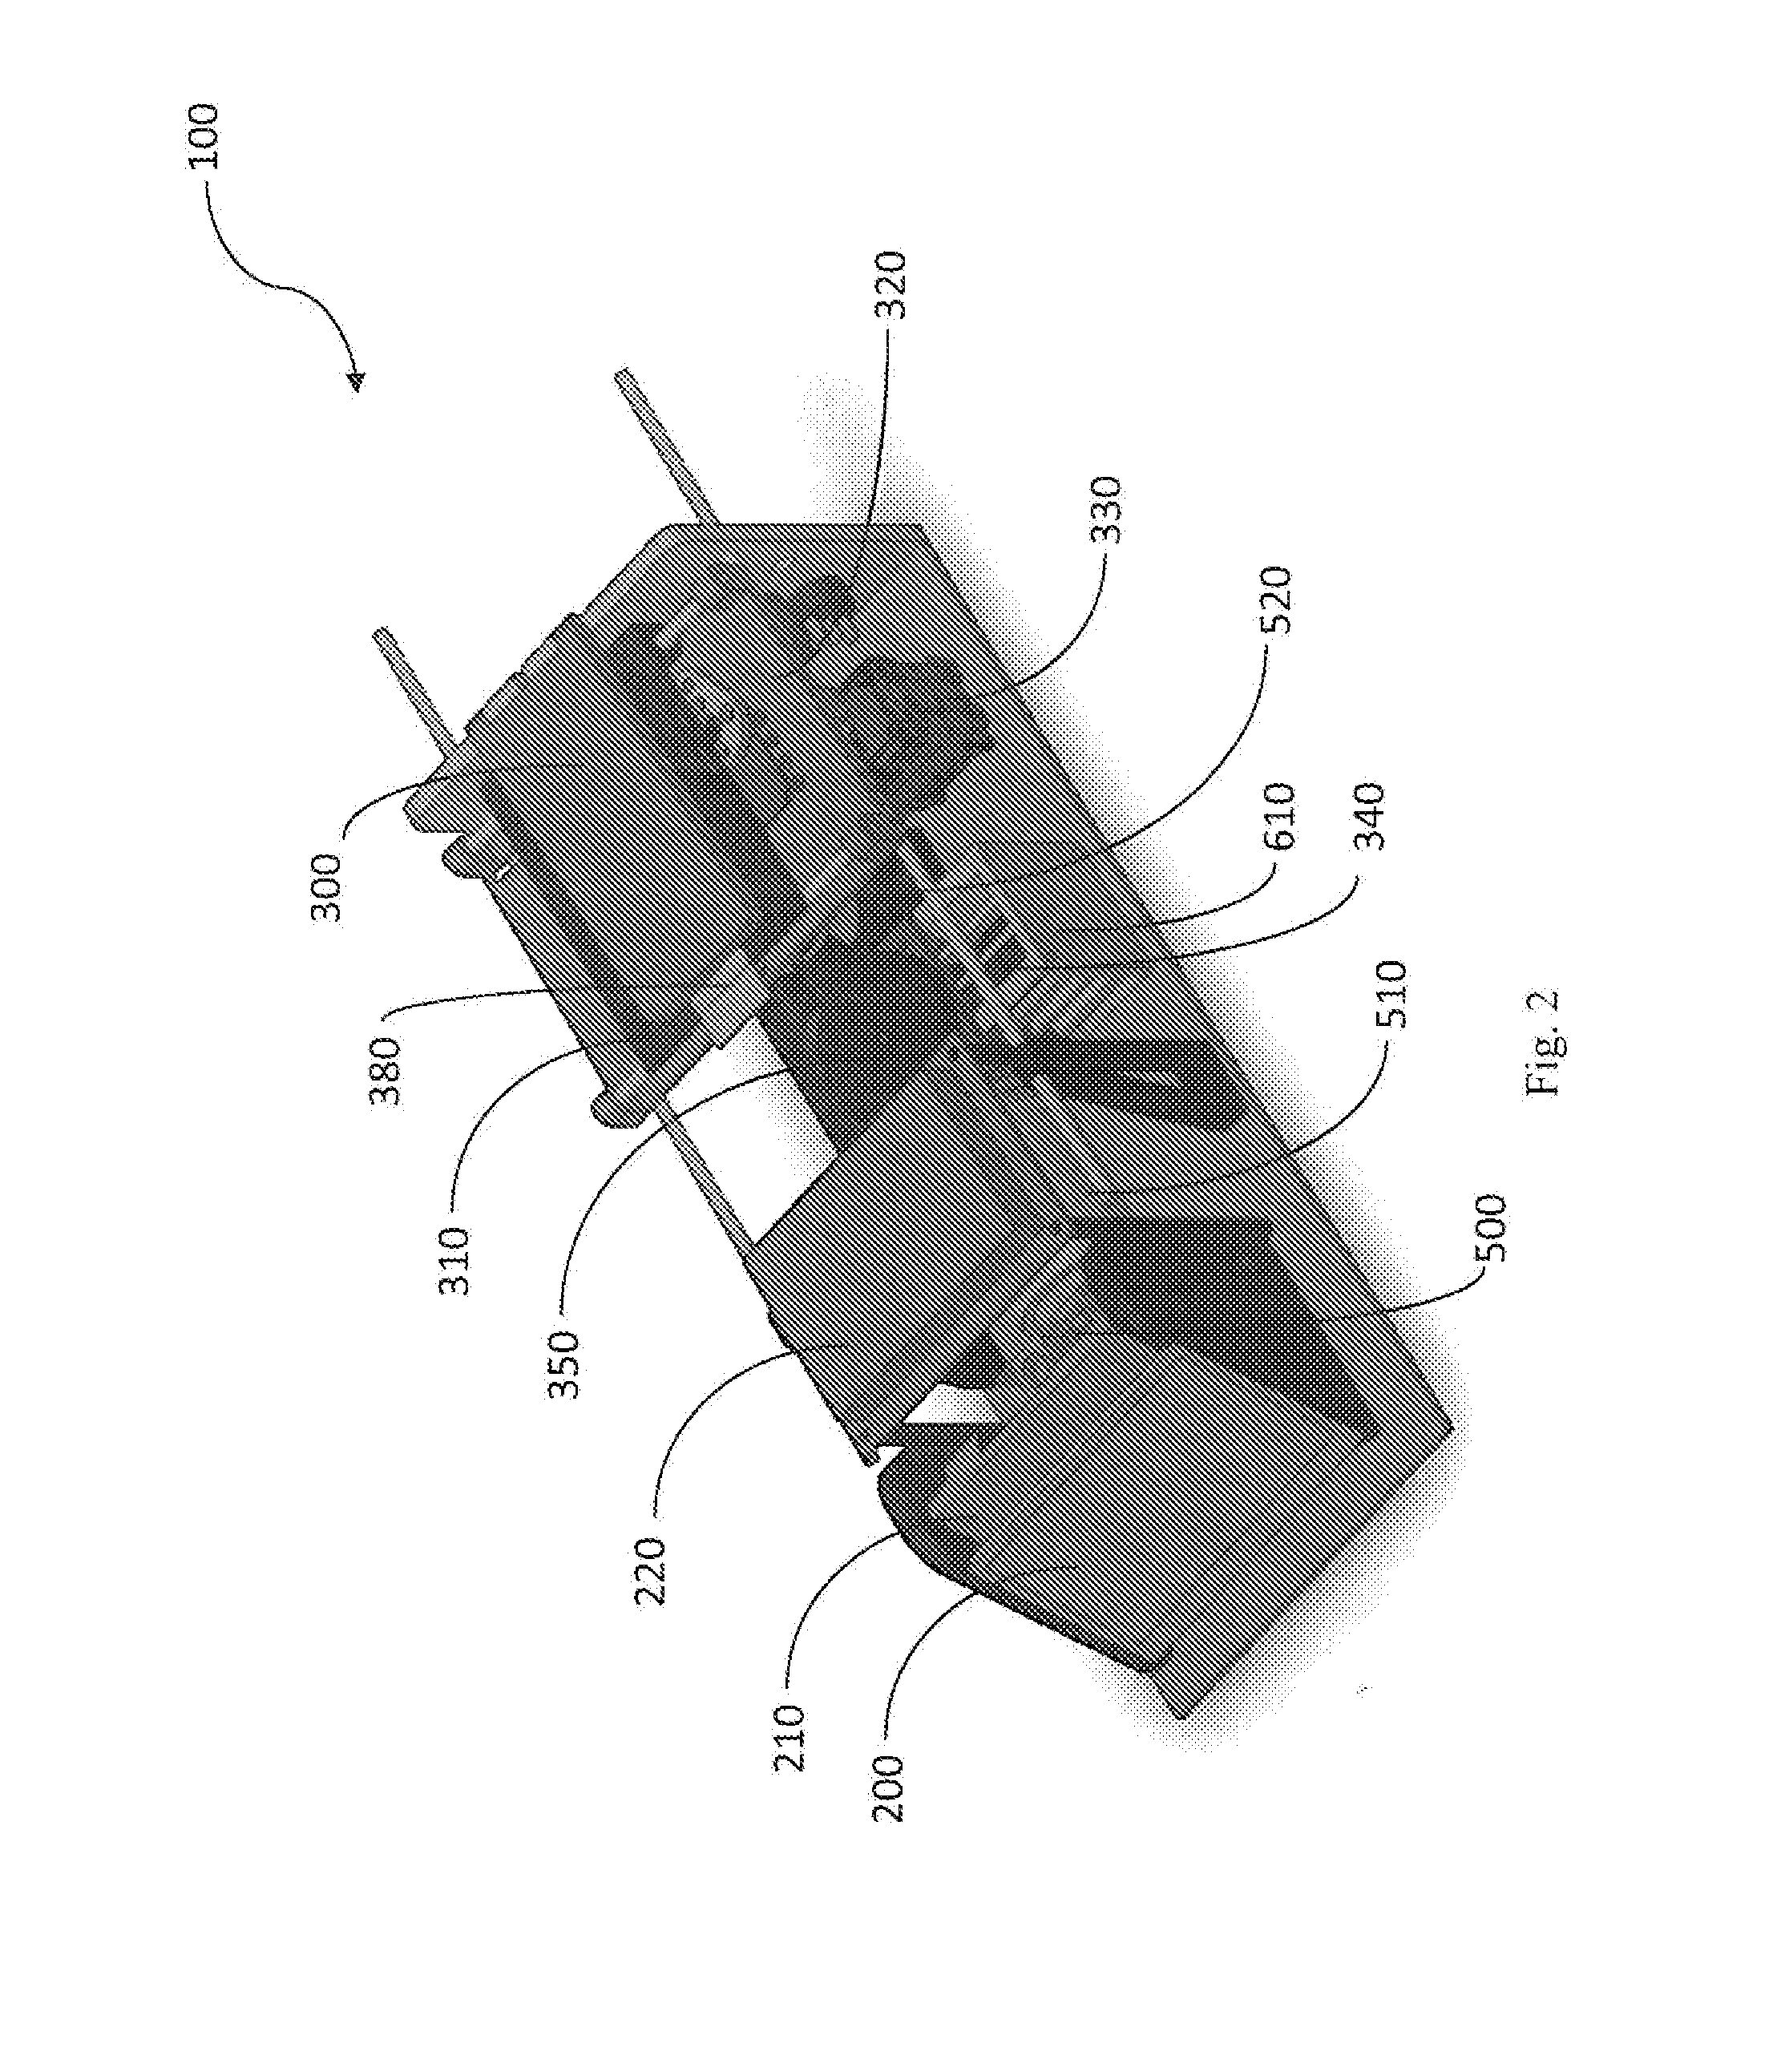 Apparatus and Method for Analyzing a Bodily Sample